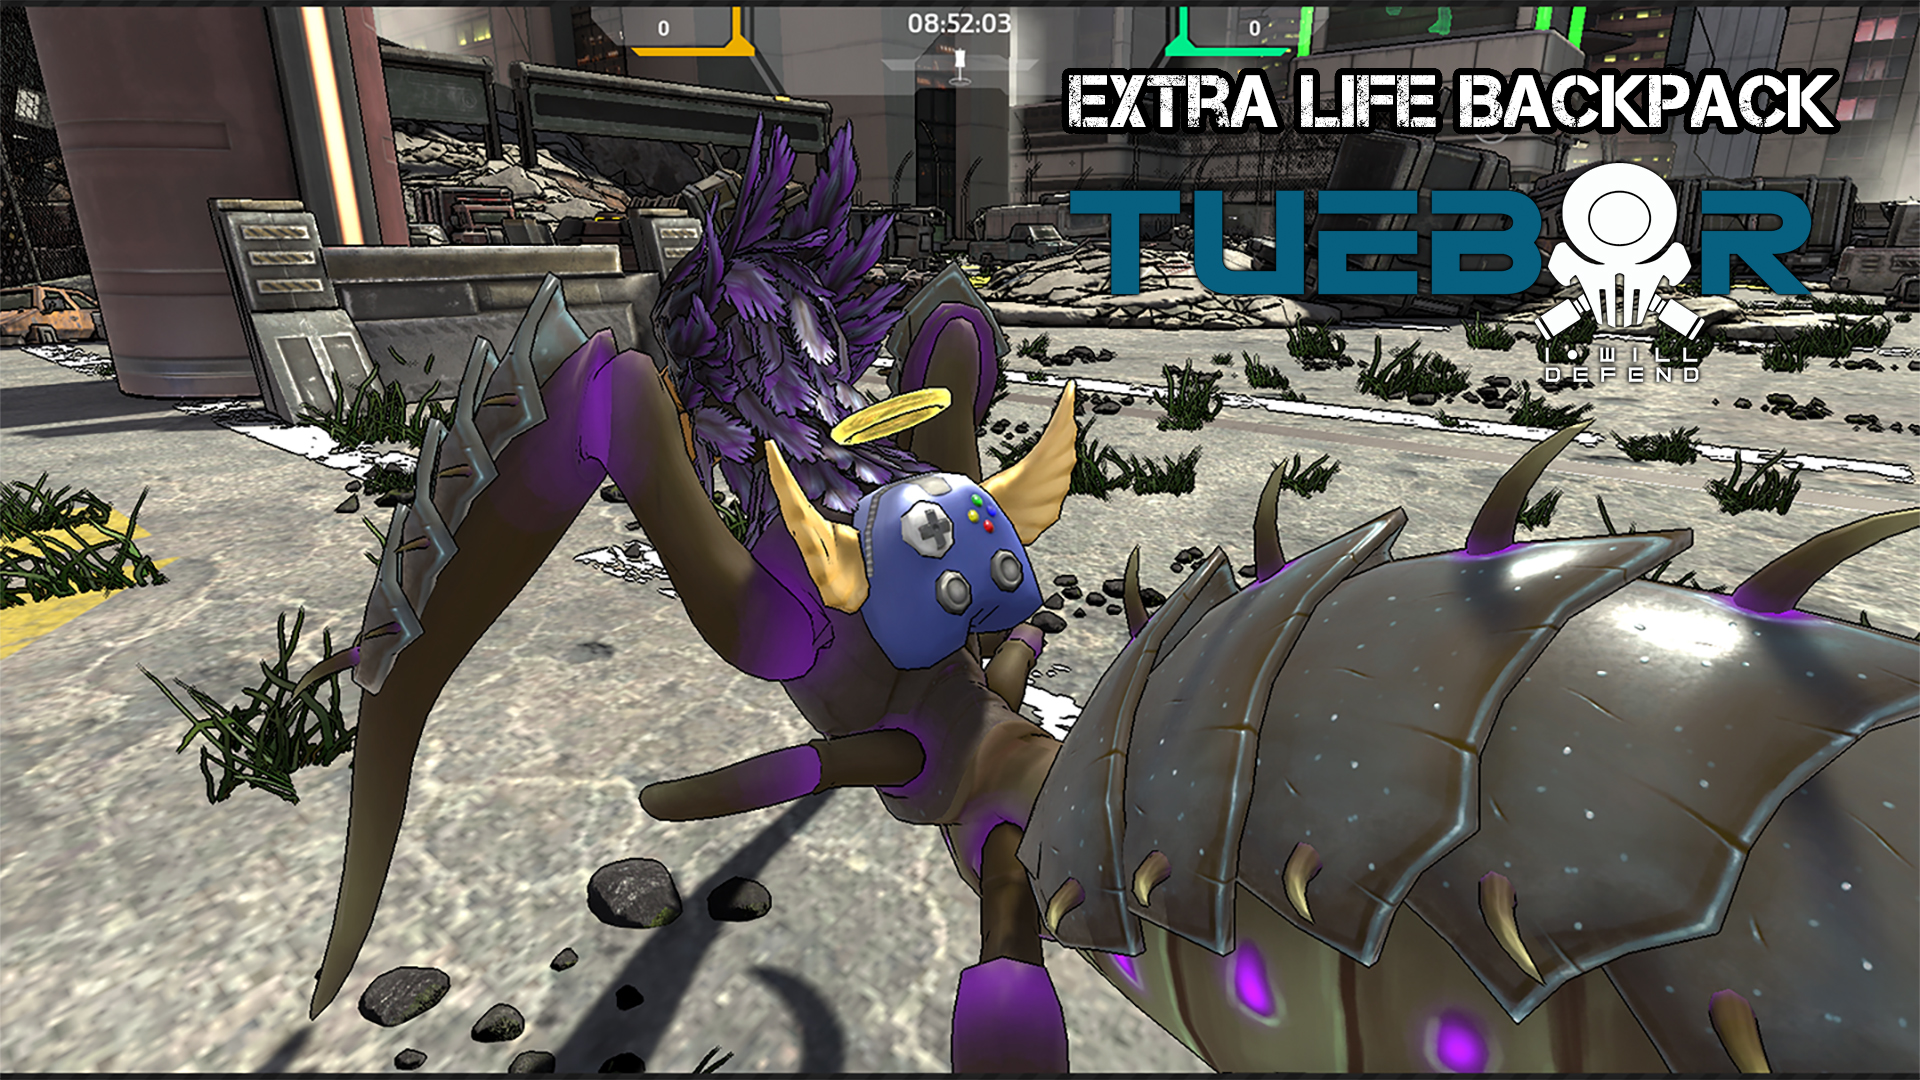 Extra Life Backpack Featured Screenshot #1